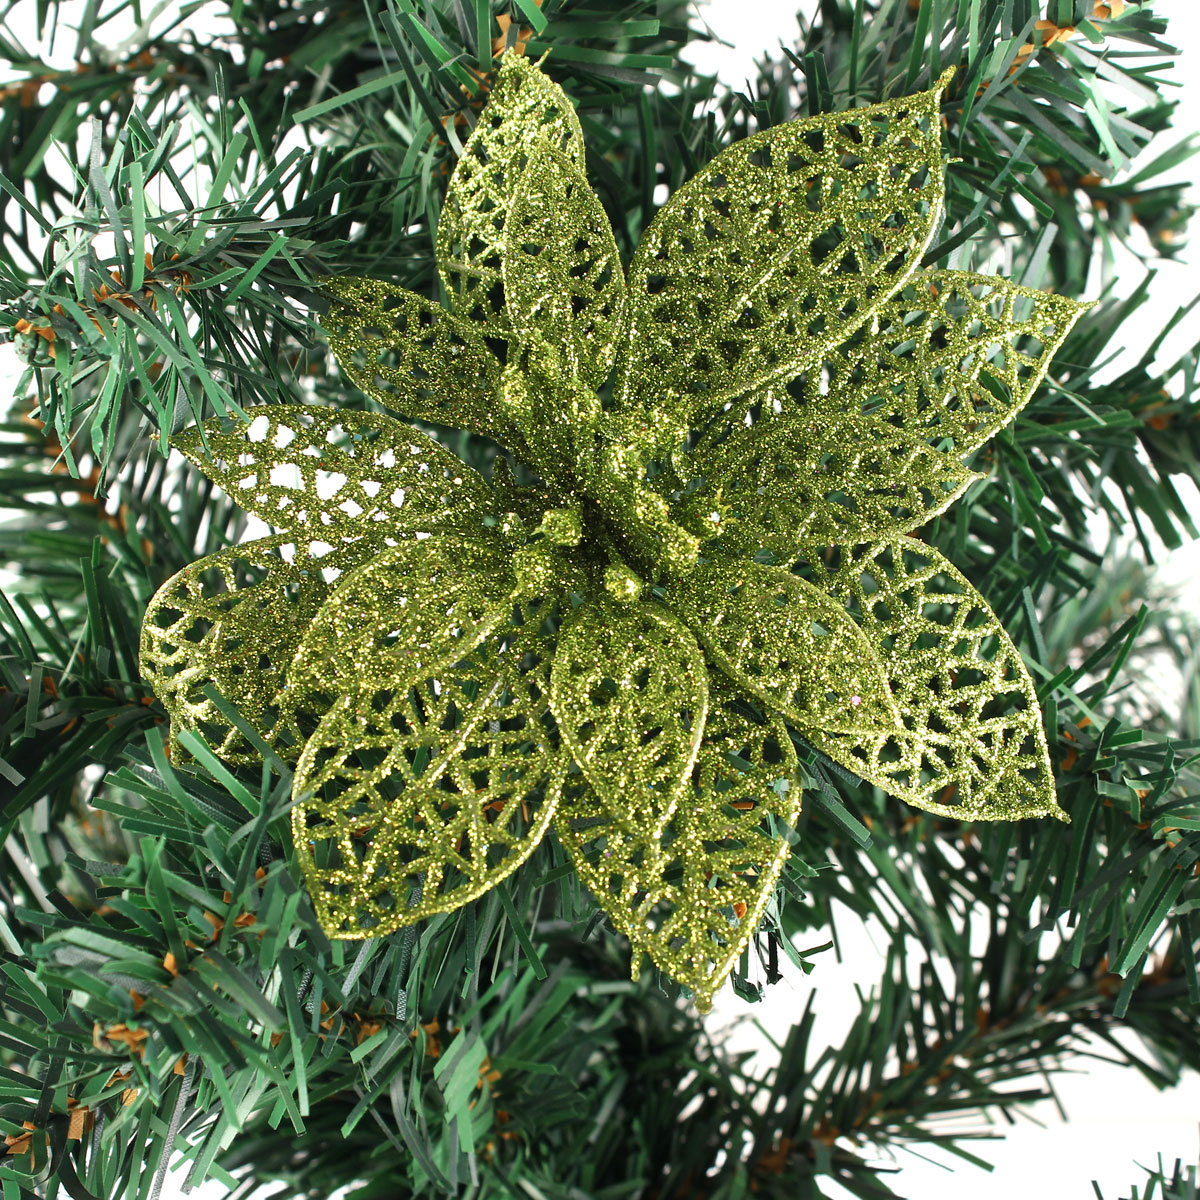 Christmas-Decoration-Flower-Glitter-Leaves-Party-Deocration-1016328